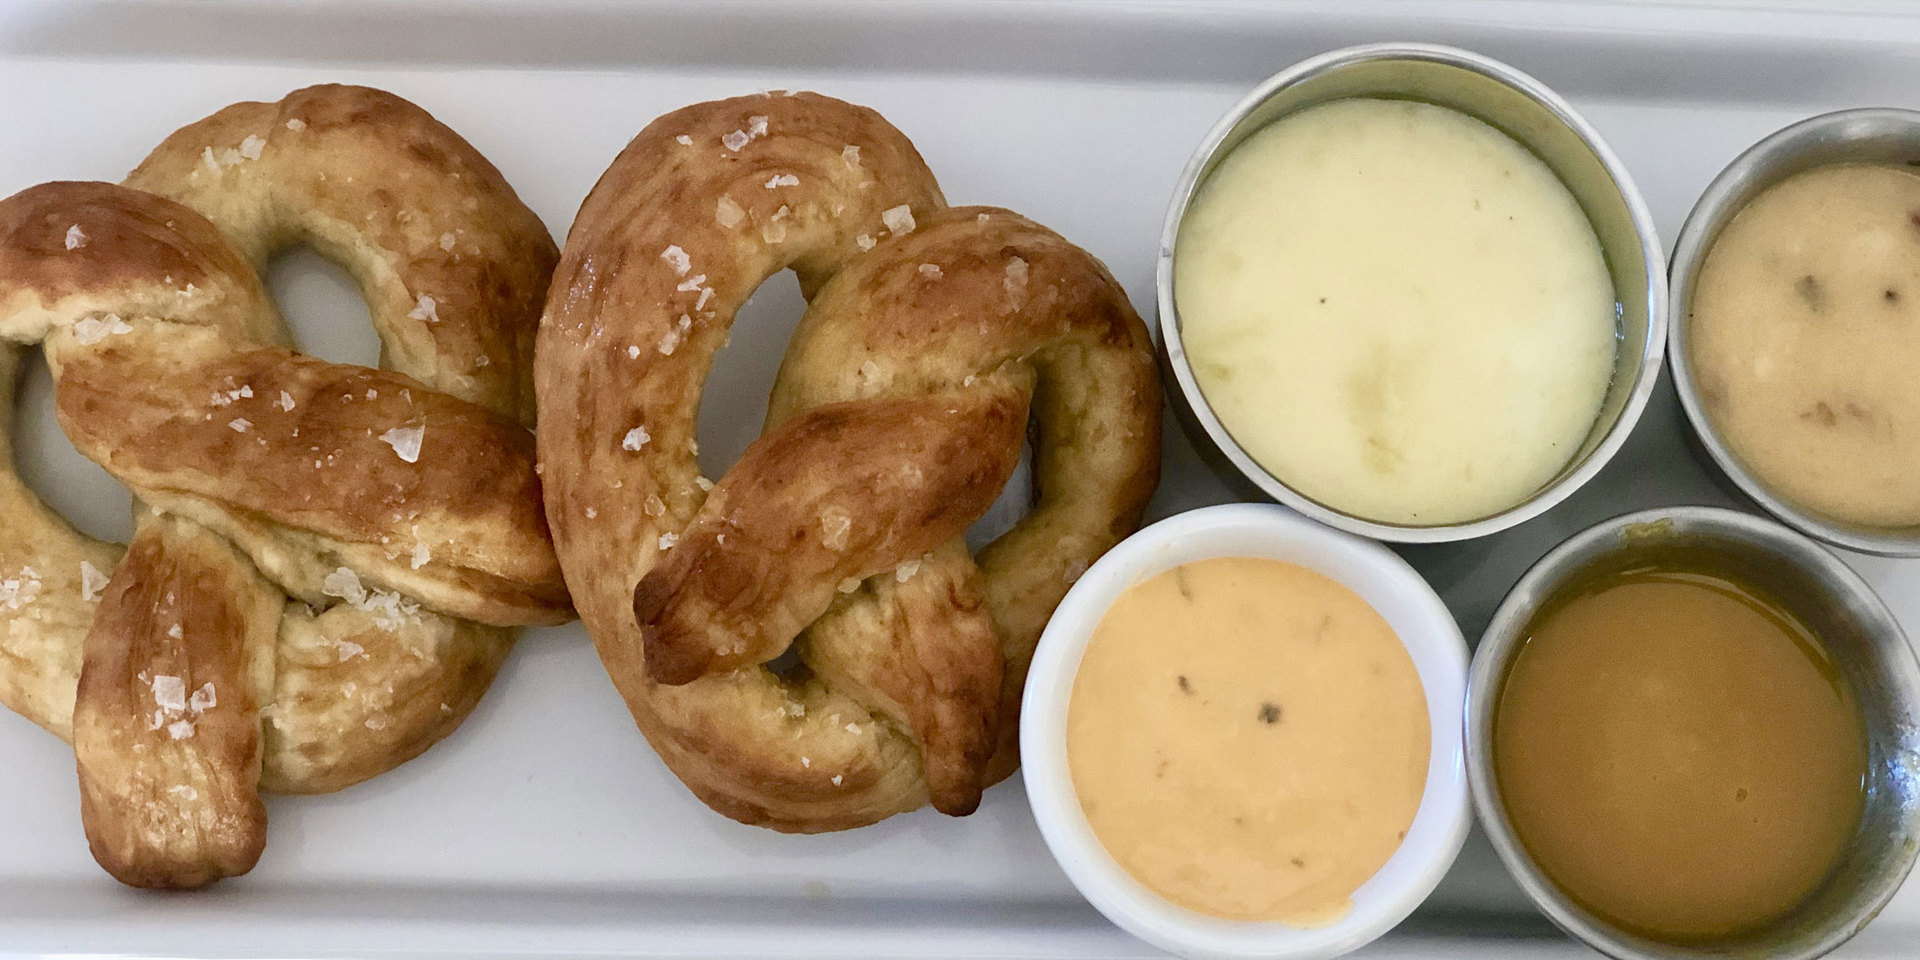 Celebrate St. Patrick's Day with Homemade Soft Pretzels Paired with Local Beer!, Online, United States